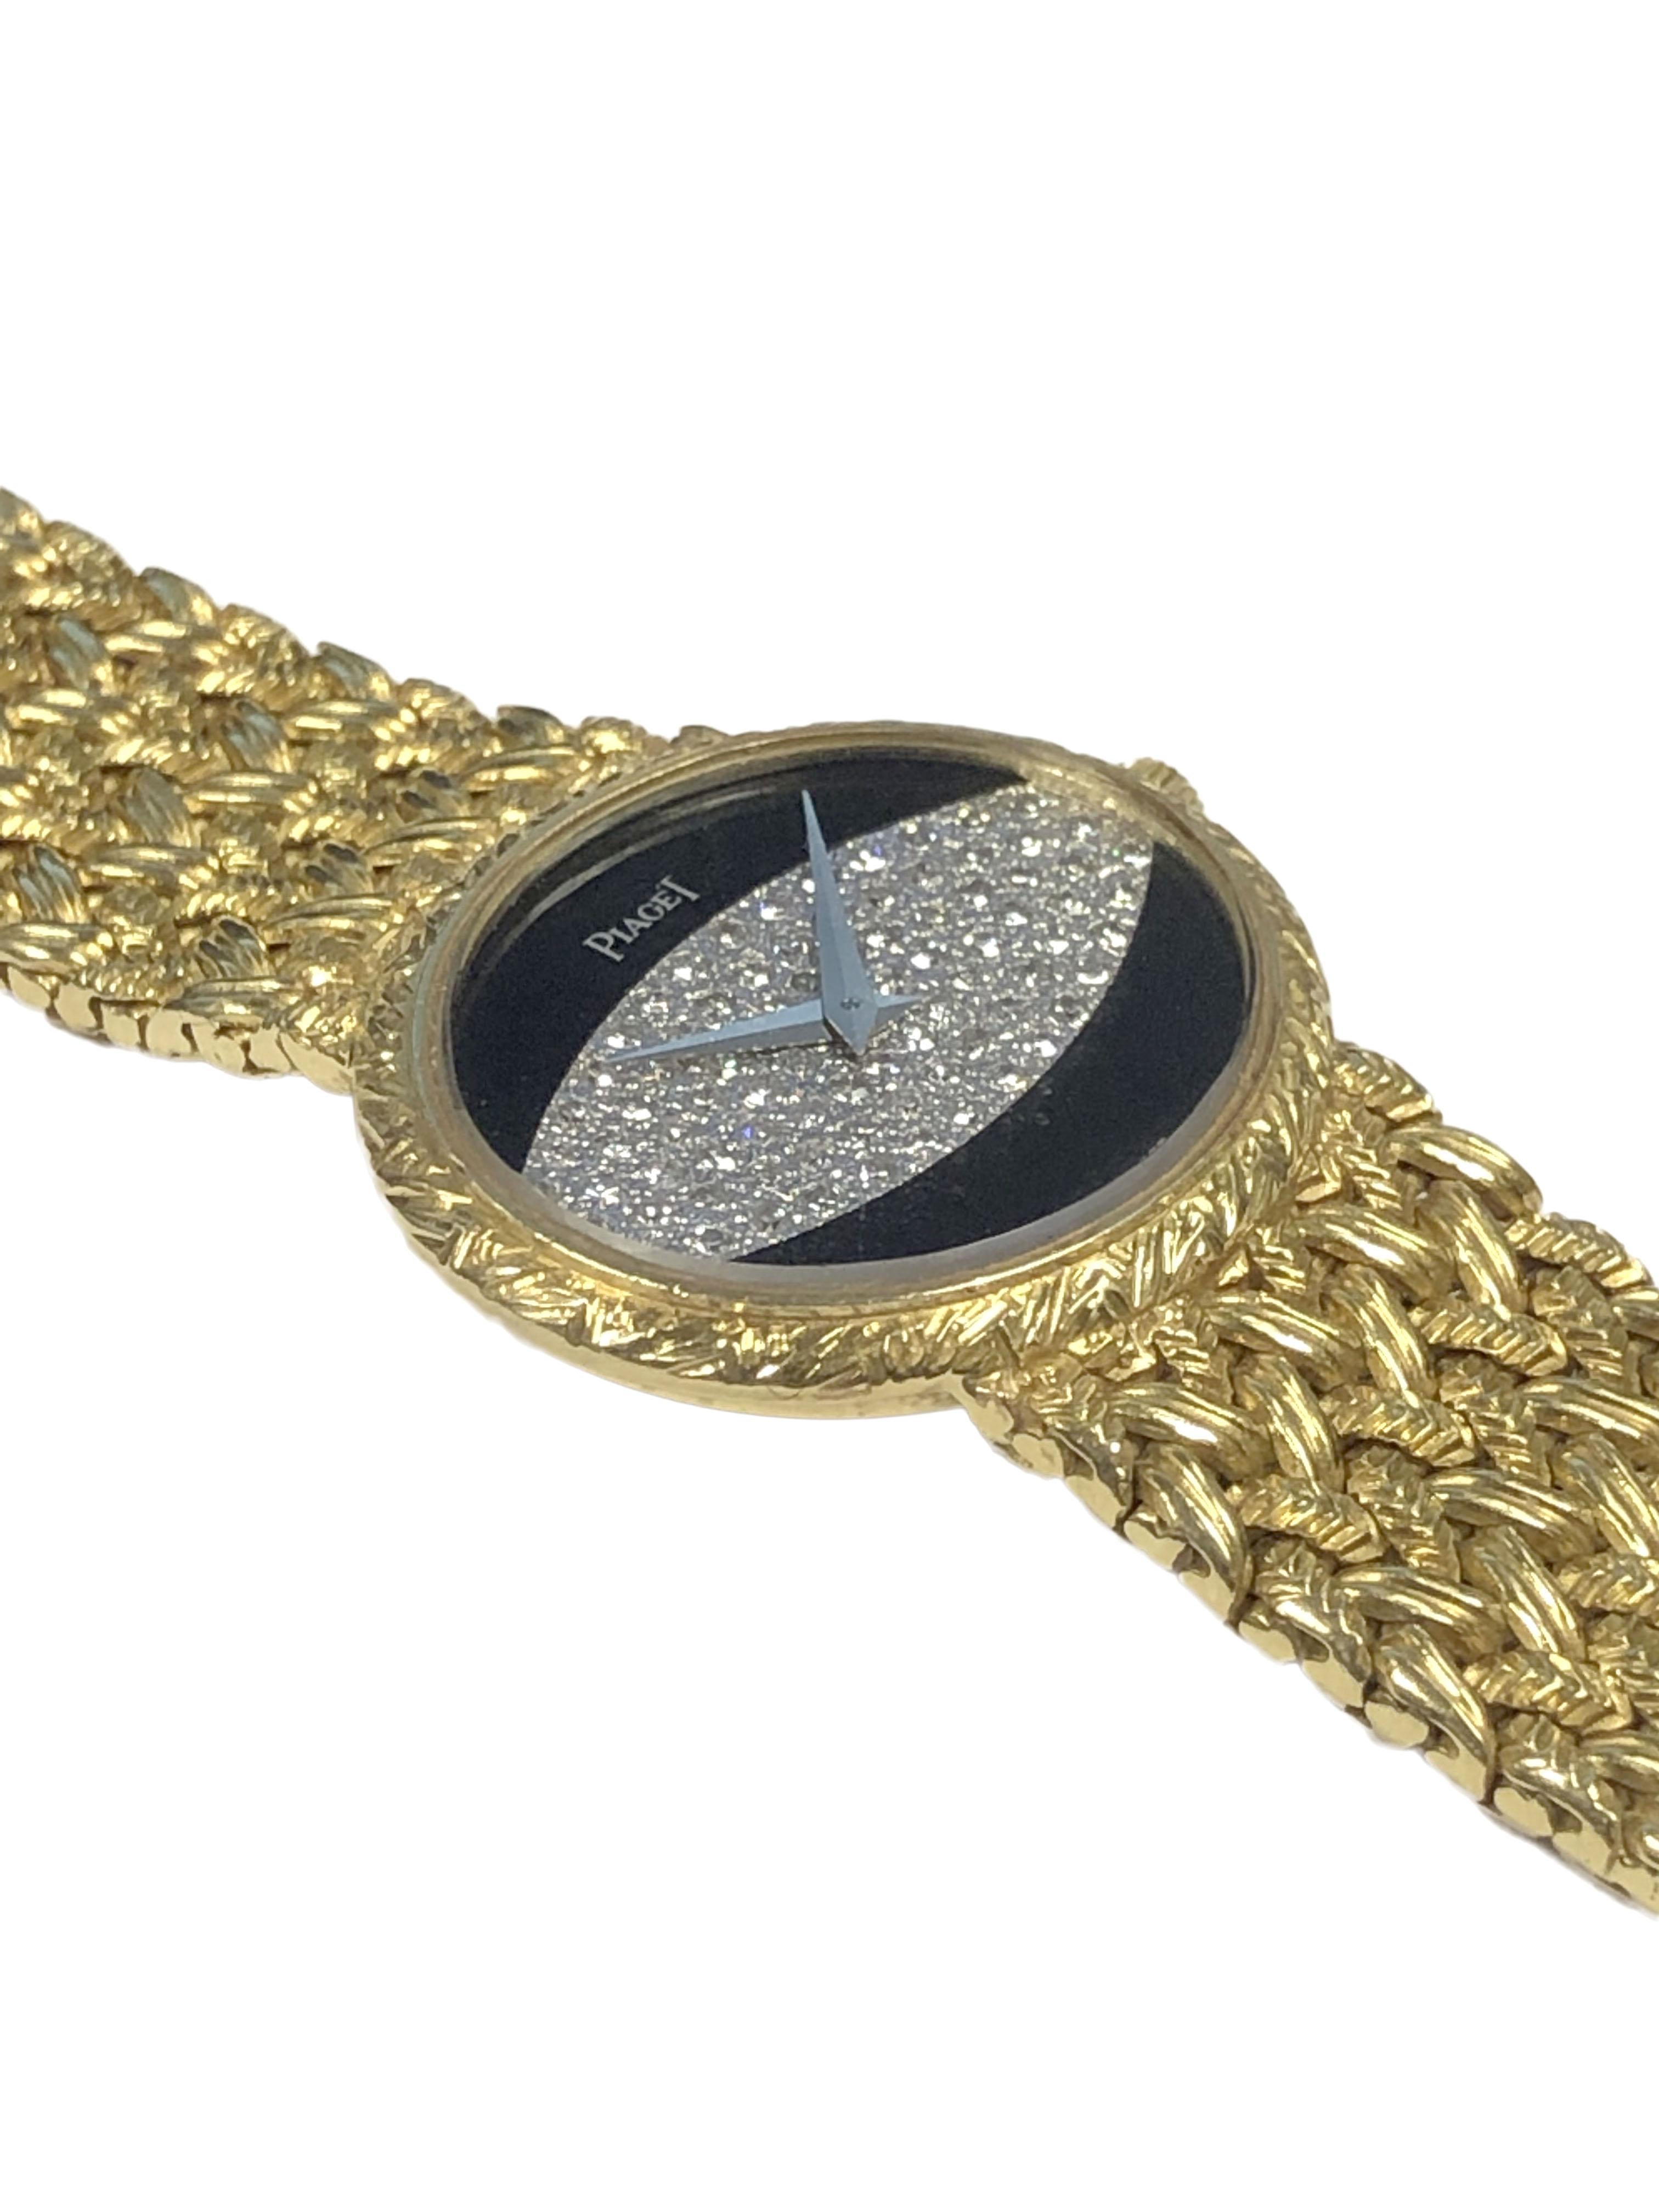 Circa 1970 Piaget Ladies Wrist Watch, 27 x 24 M.M. 18k Yellow Gold 2 piece Oval case with textured bezel, Onyx and Diamond Pave dial, 17 jewel mechanical, manual wind movement.  attached soft mesh woven flexible bracelet with Piaget signed clasp.